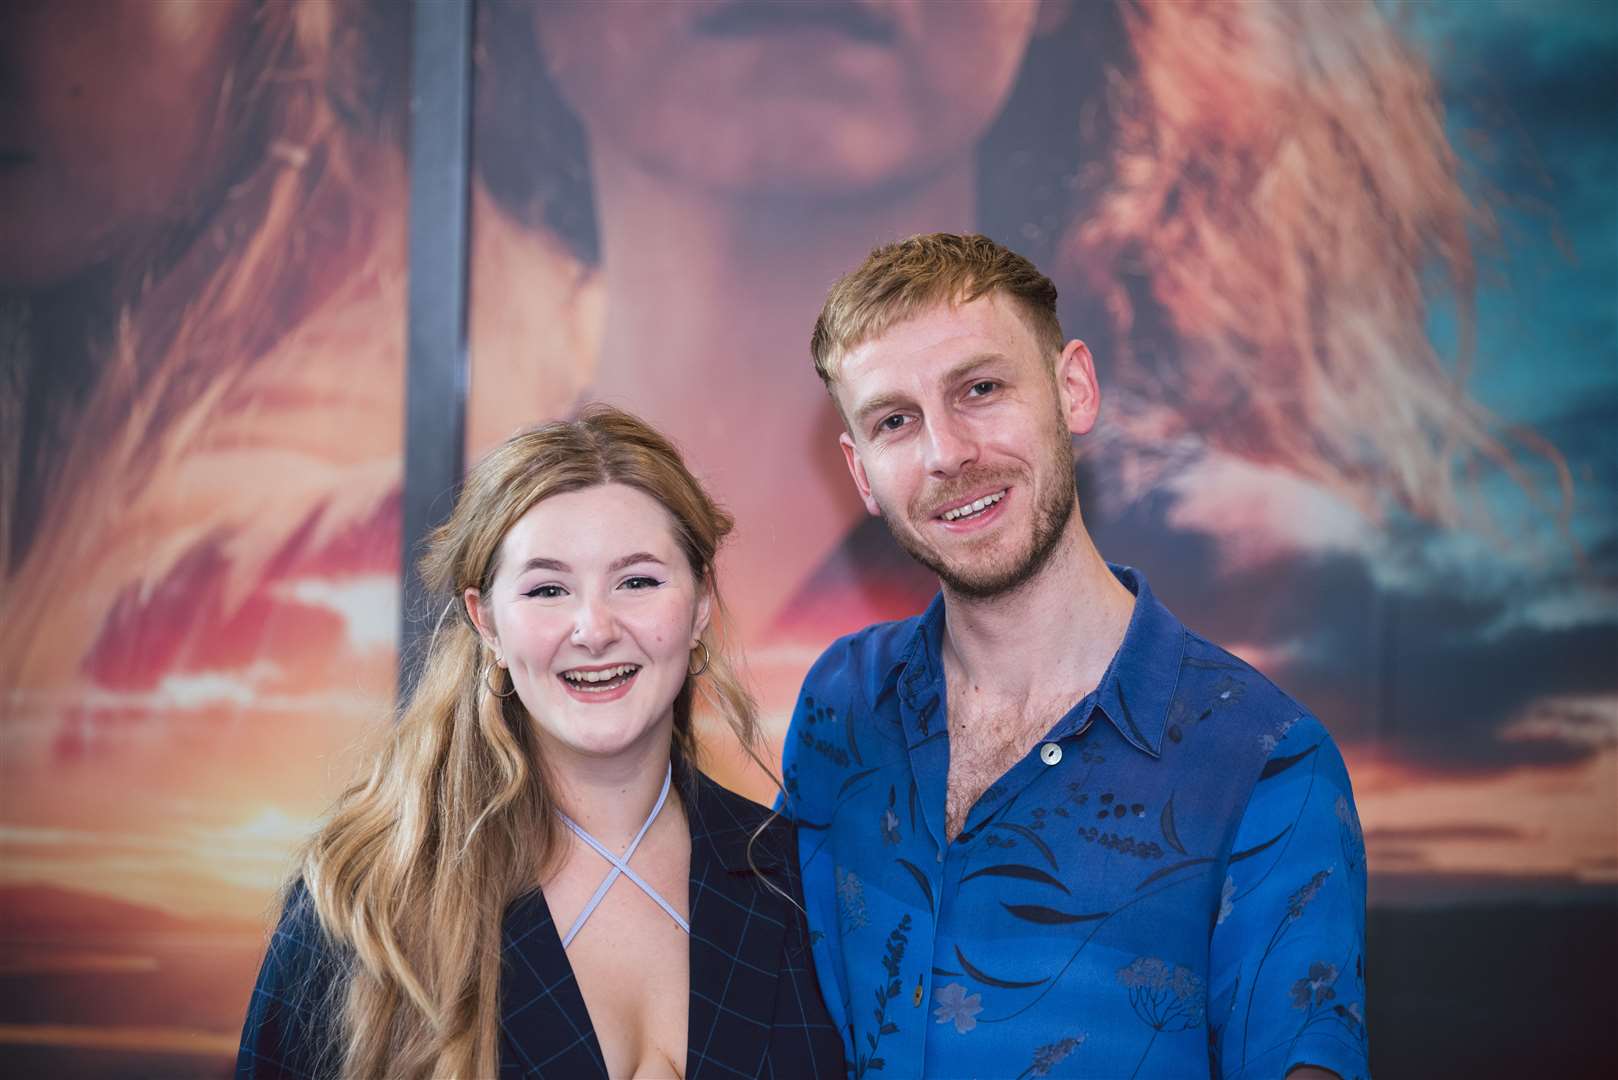 Islander actress Bethany Tennick with composer Finn Anderson at the premiere of the film at Eden Court. Picture: Dylan Morrison